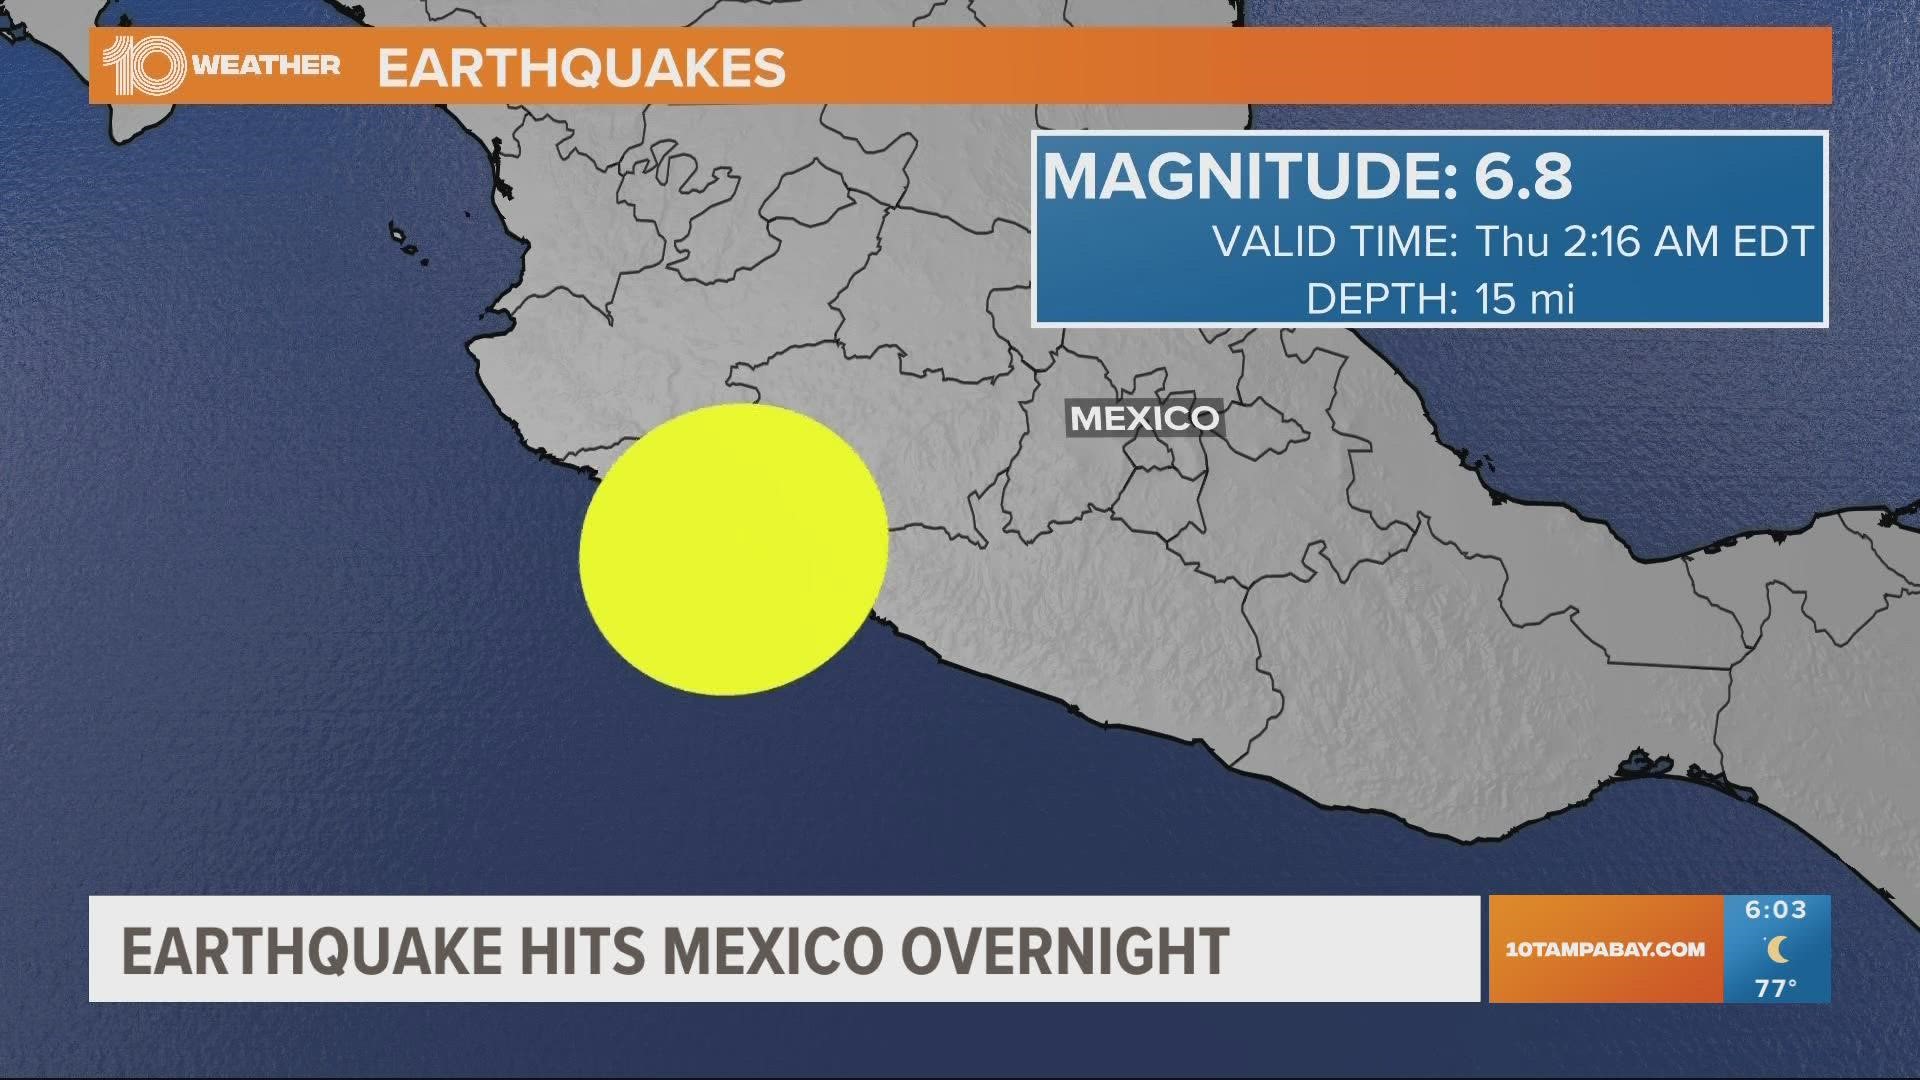 The earthquake happened just after 2:15 a.m. this morning.